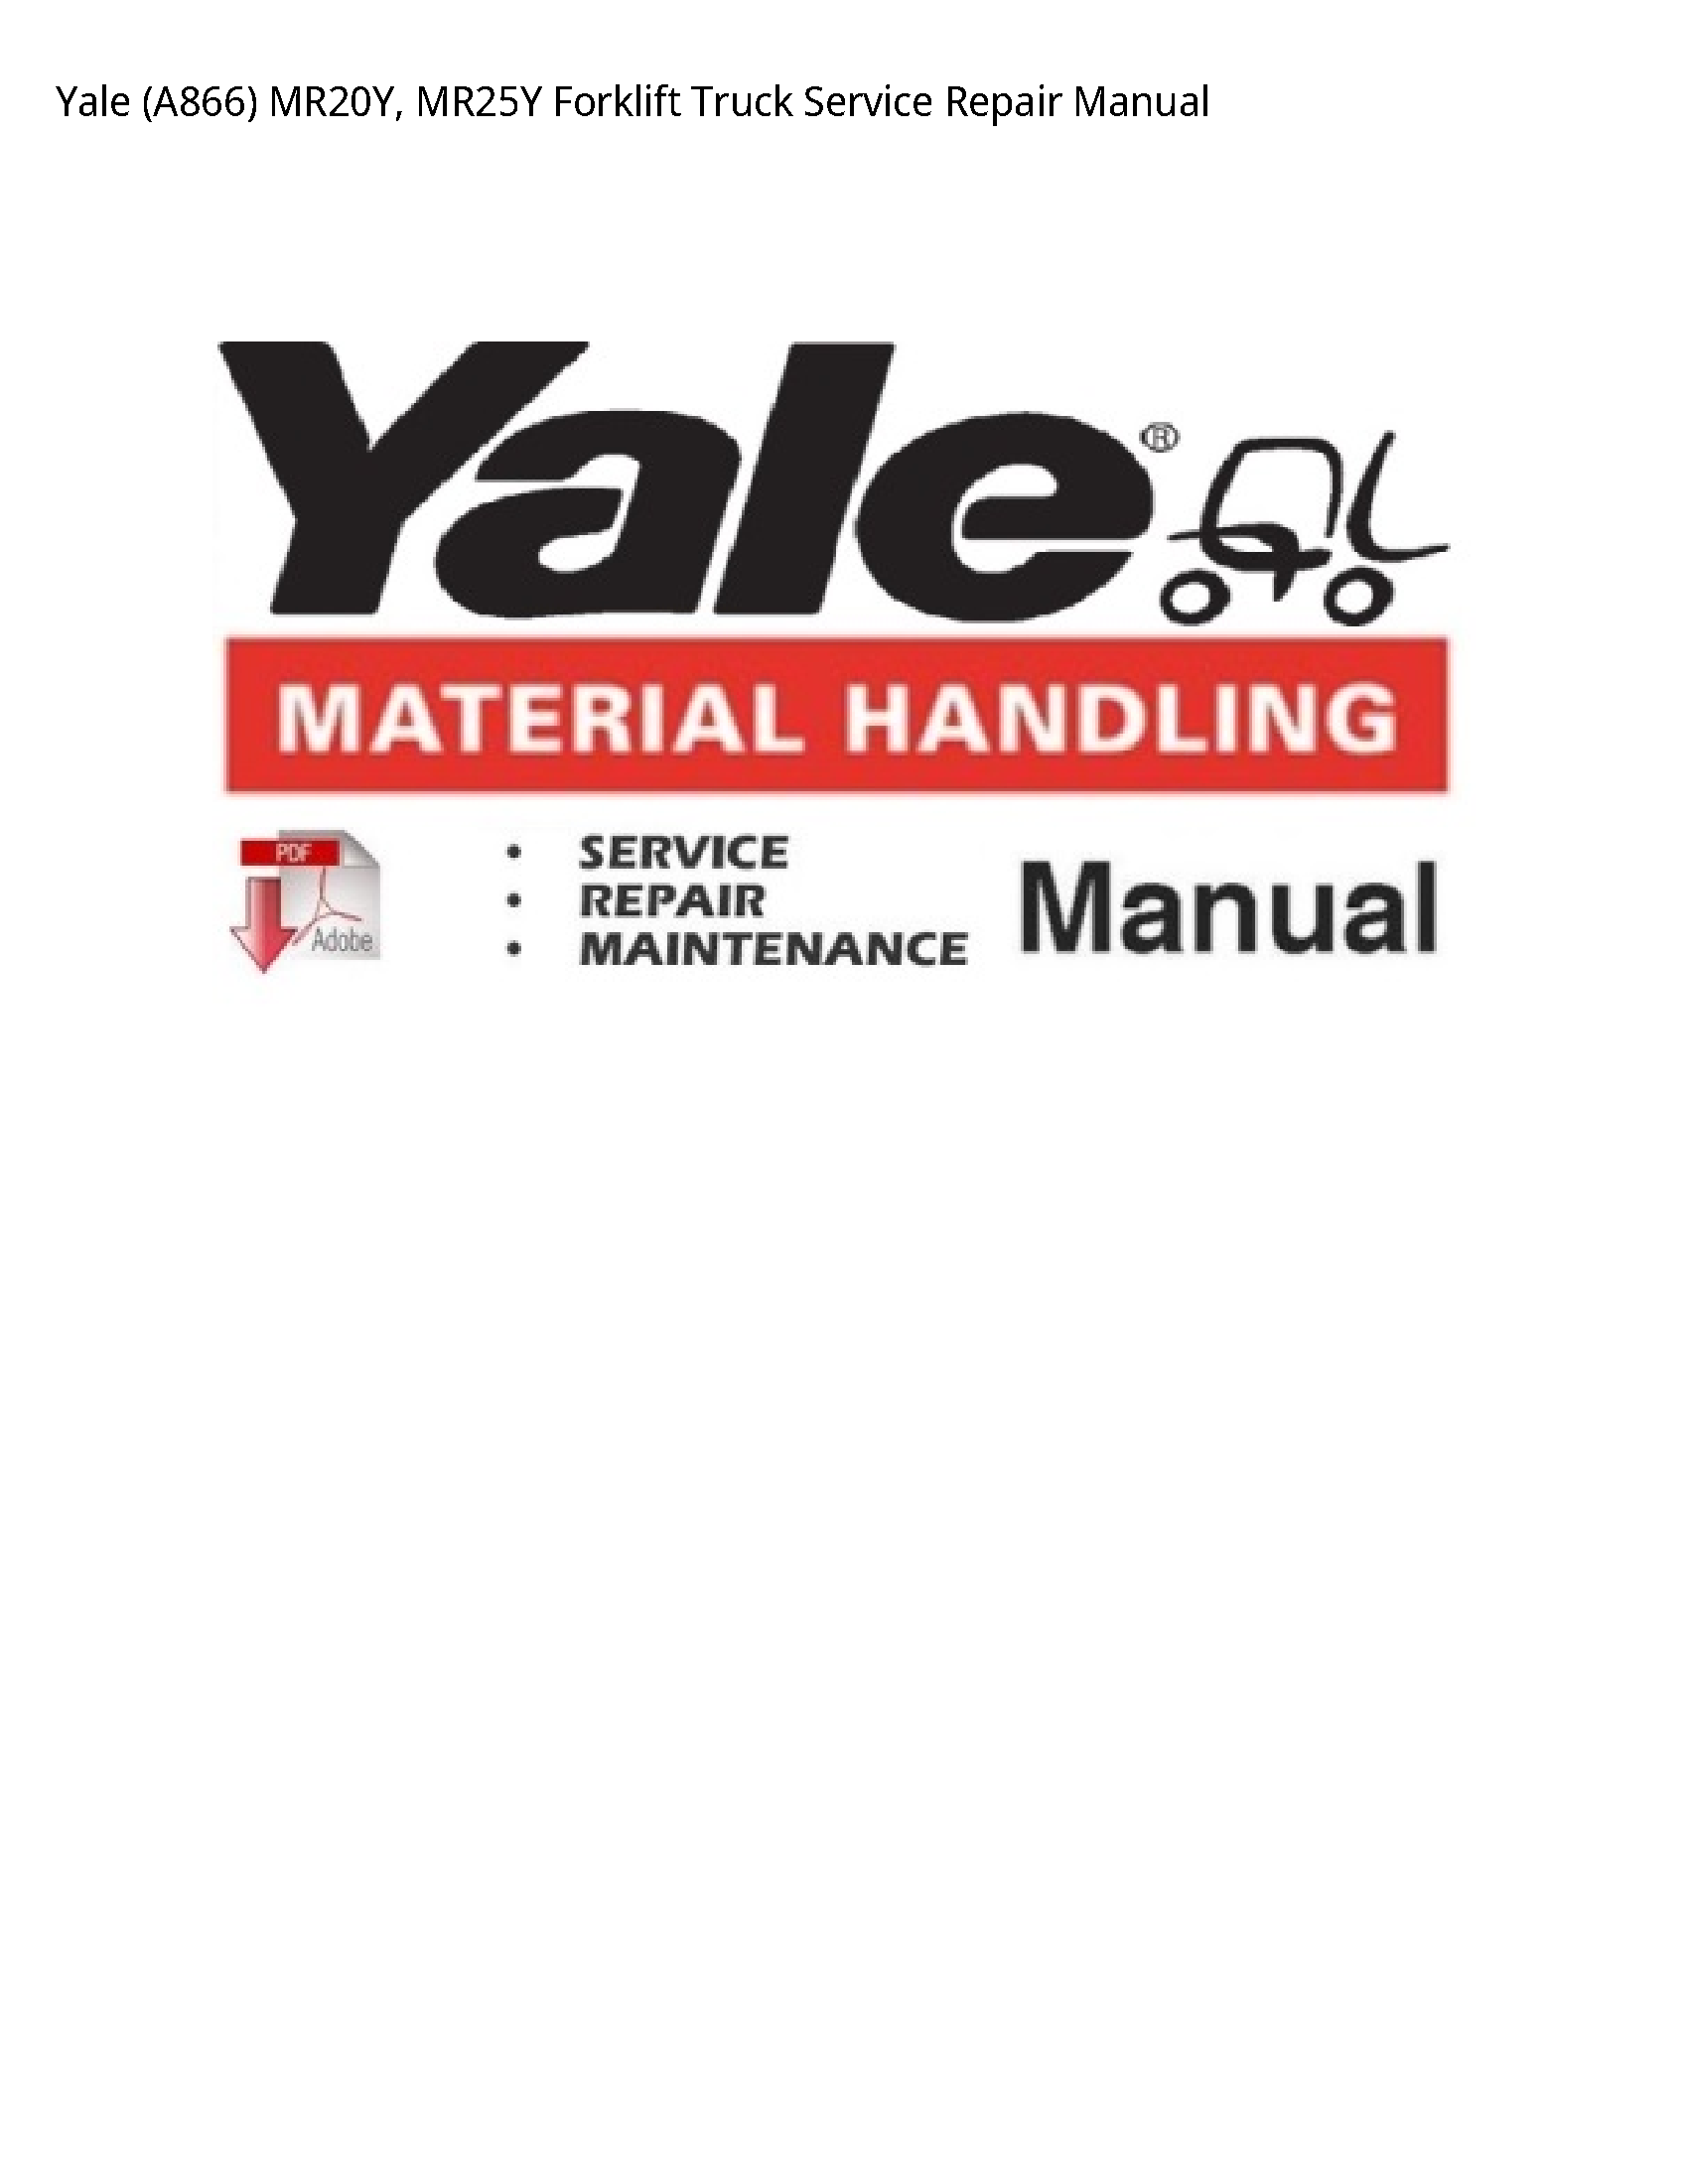 Yale (A866) Forklift Truck manual